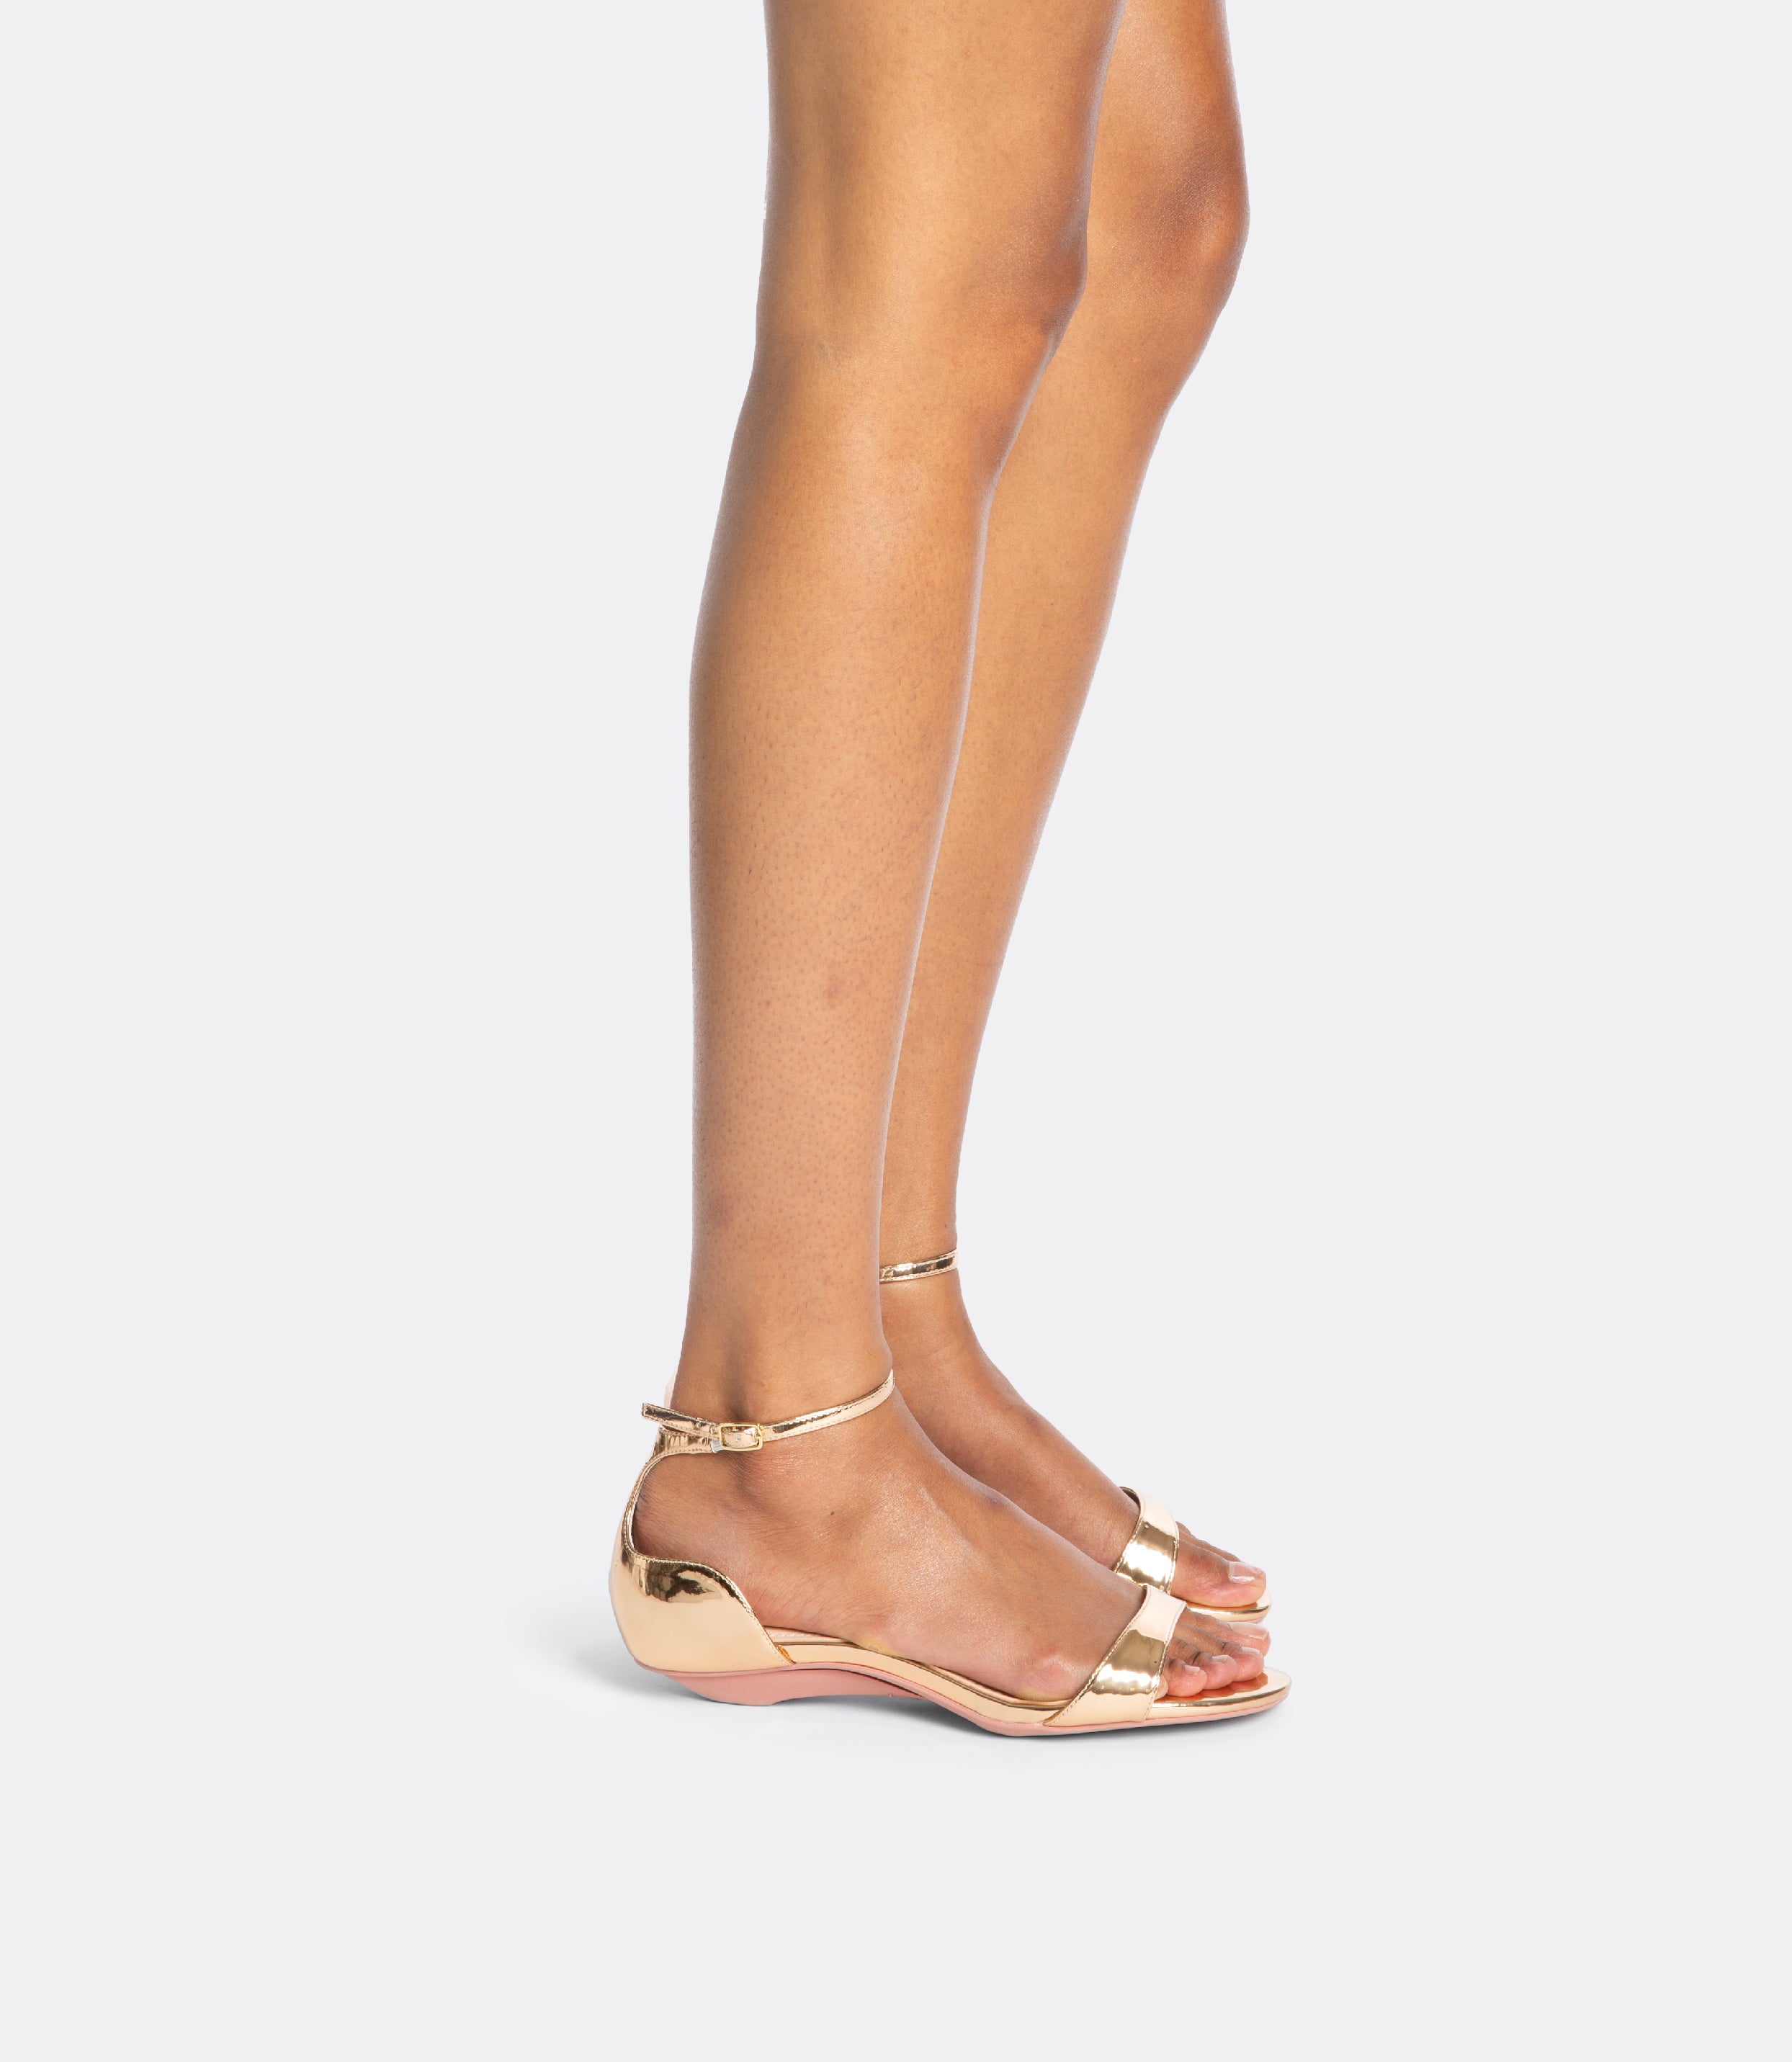 Model wearing the rose gold editor sandals as flats.